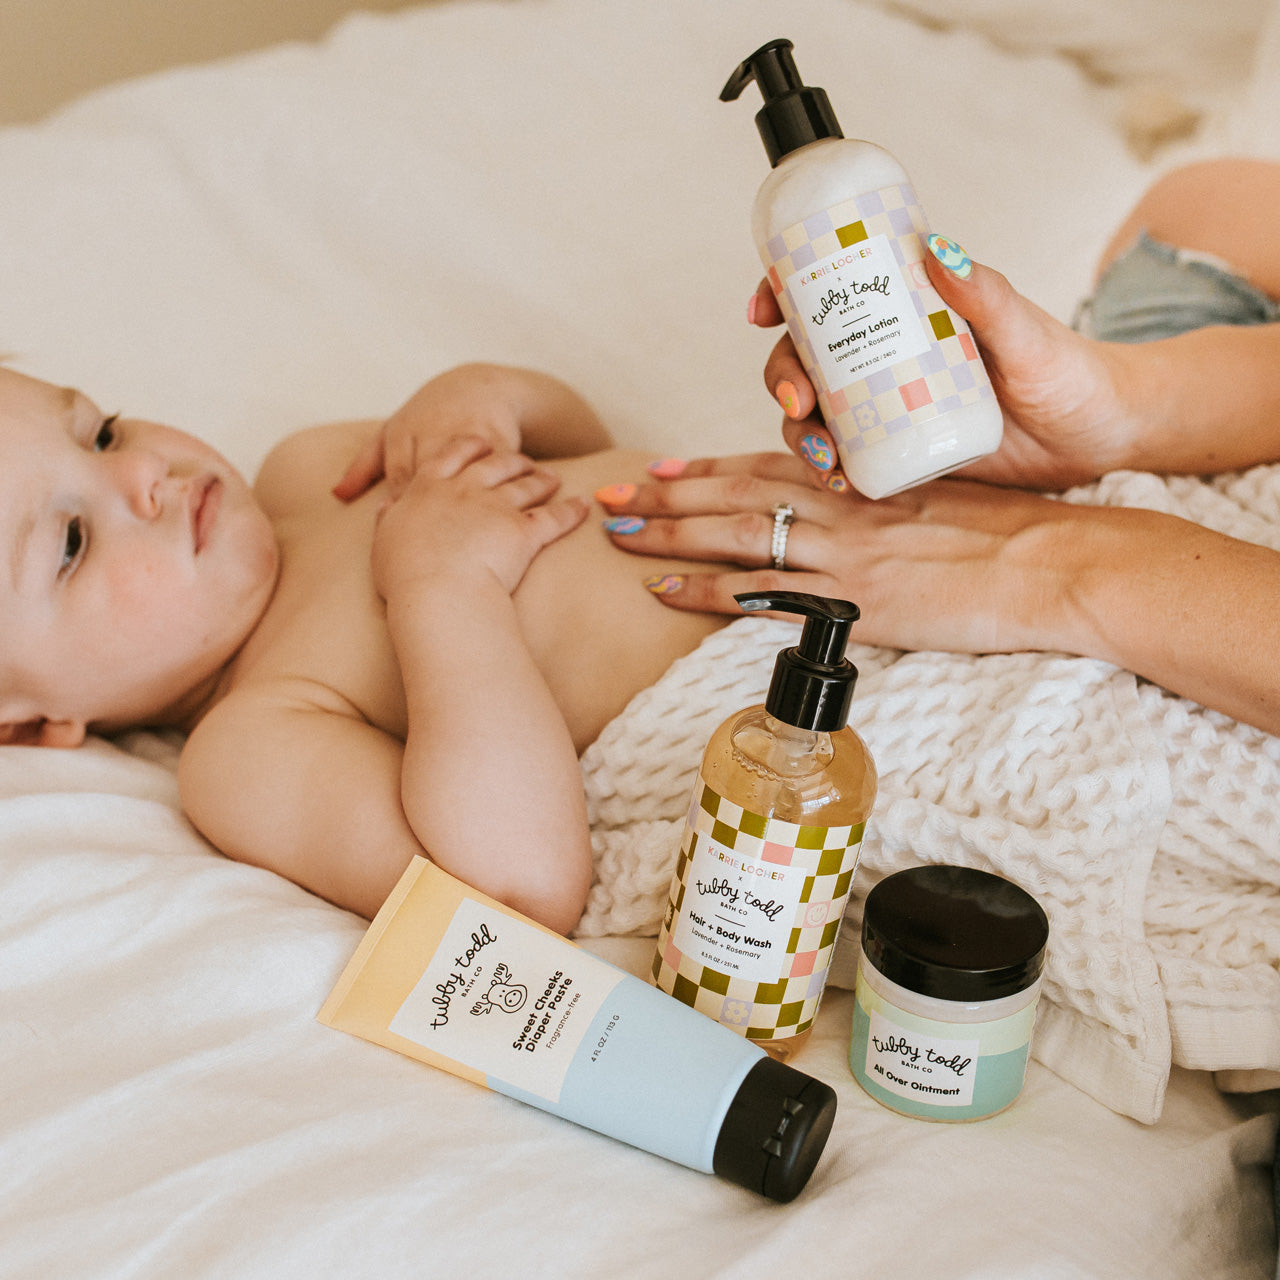 Karrie Locher applying Baby Bundle products to toddler on bed